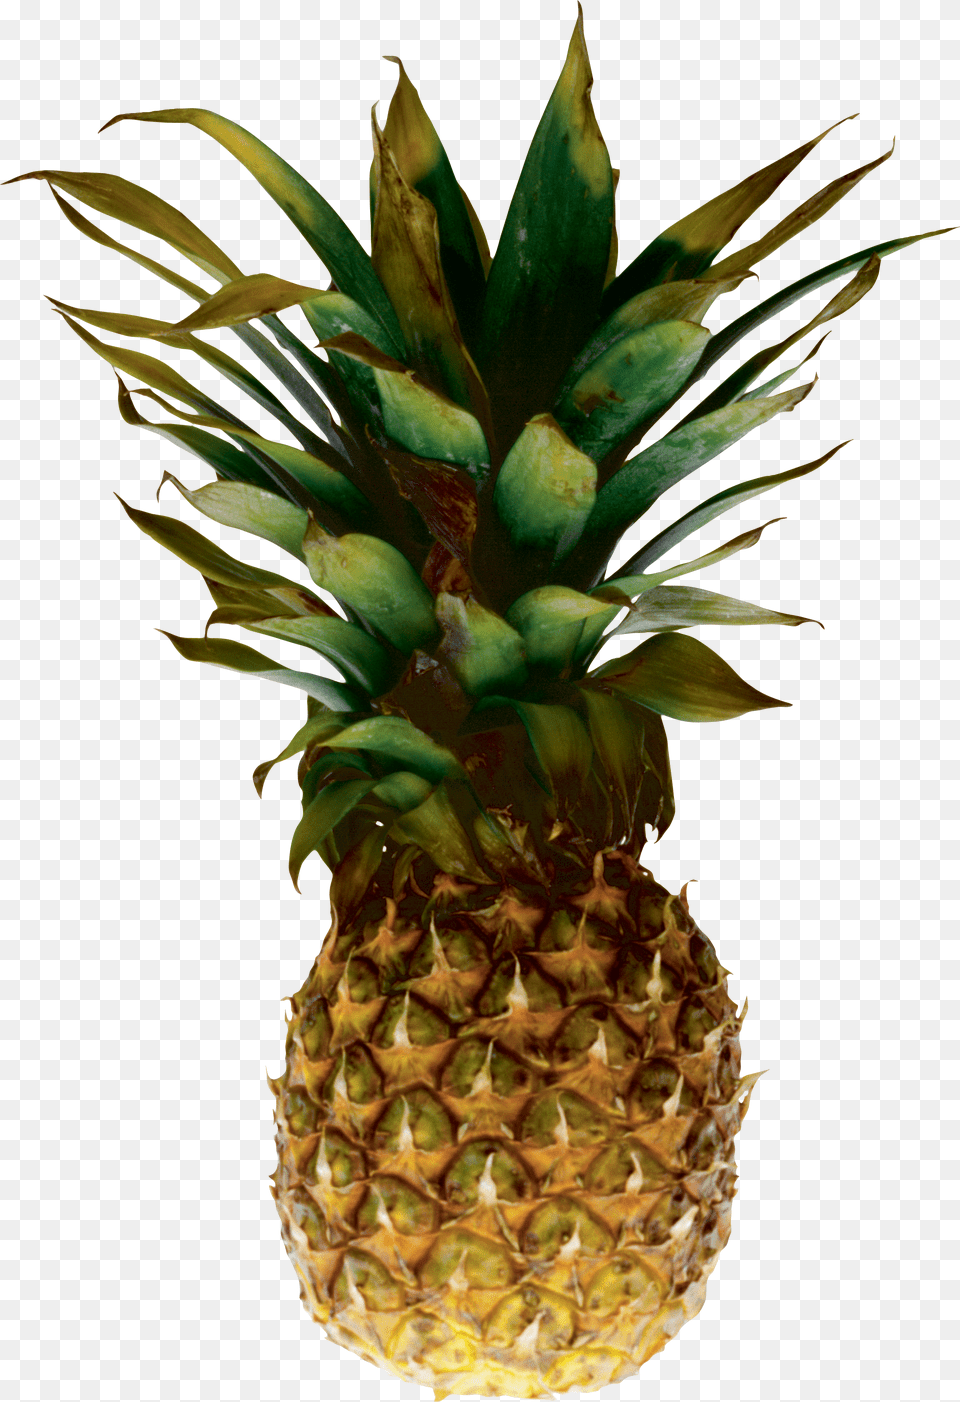 Pineapple Image Download Pineapple Transparent Background Png